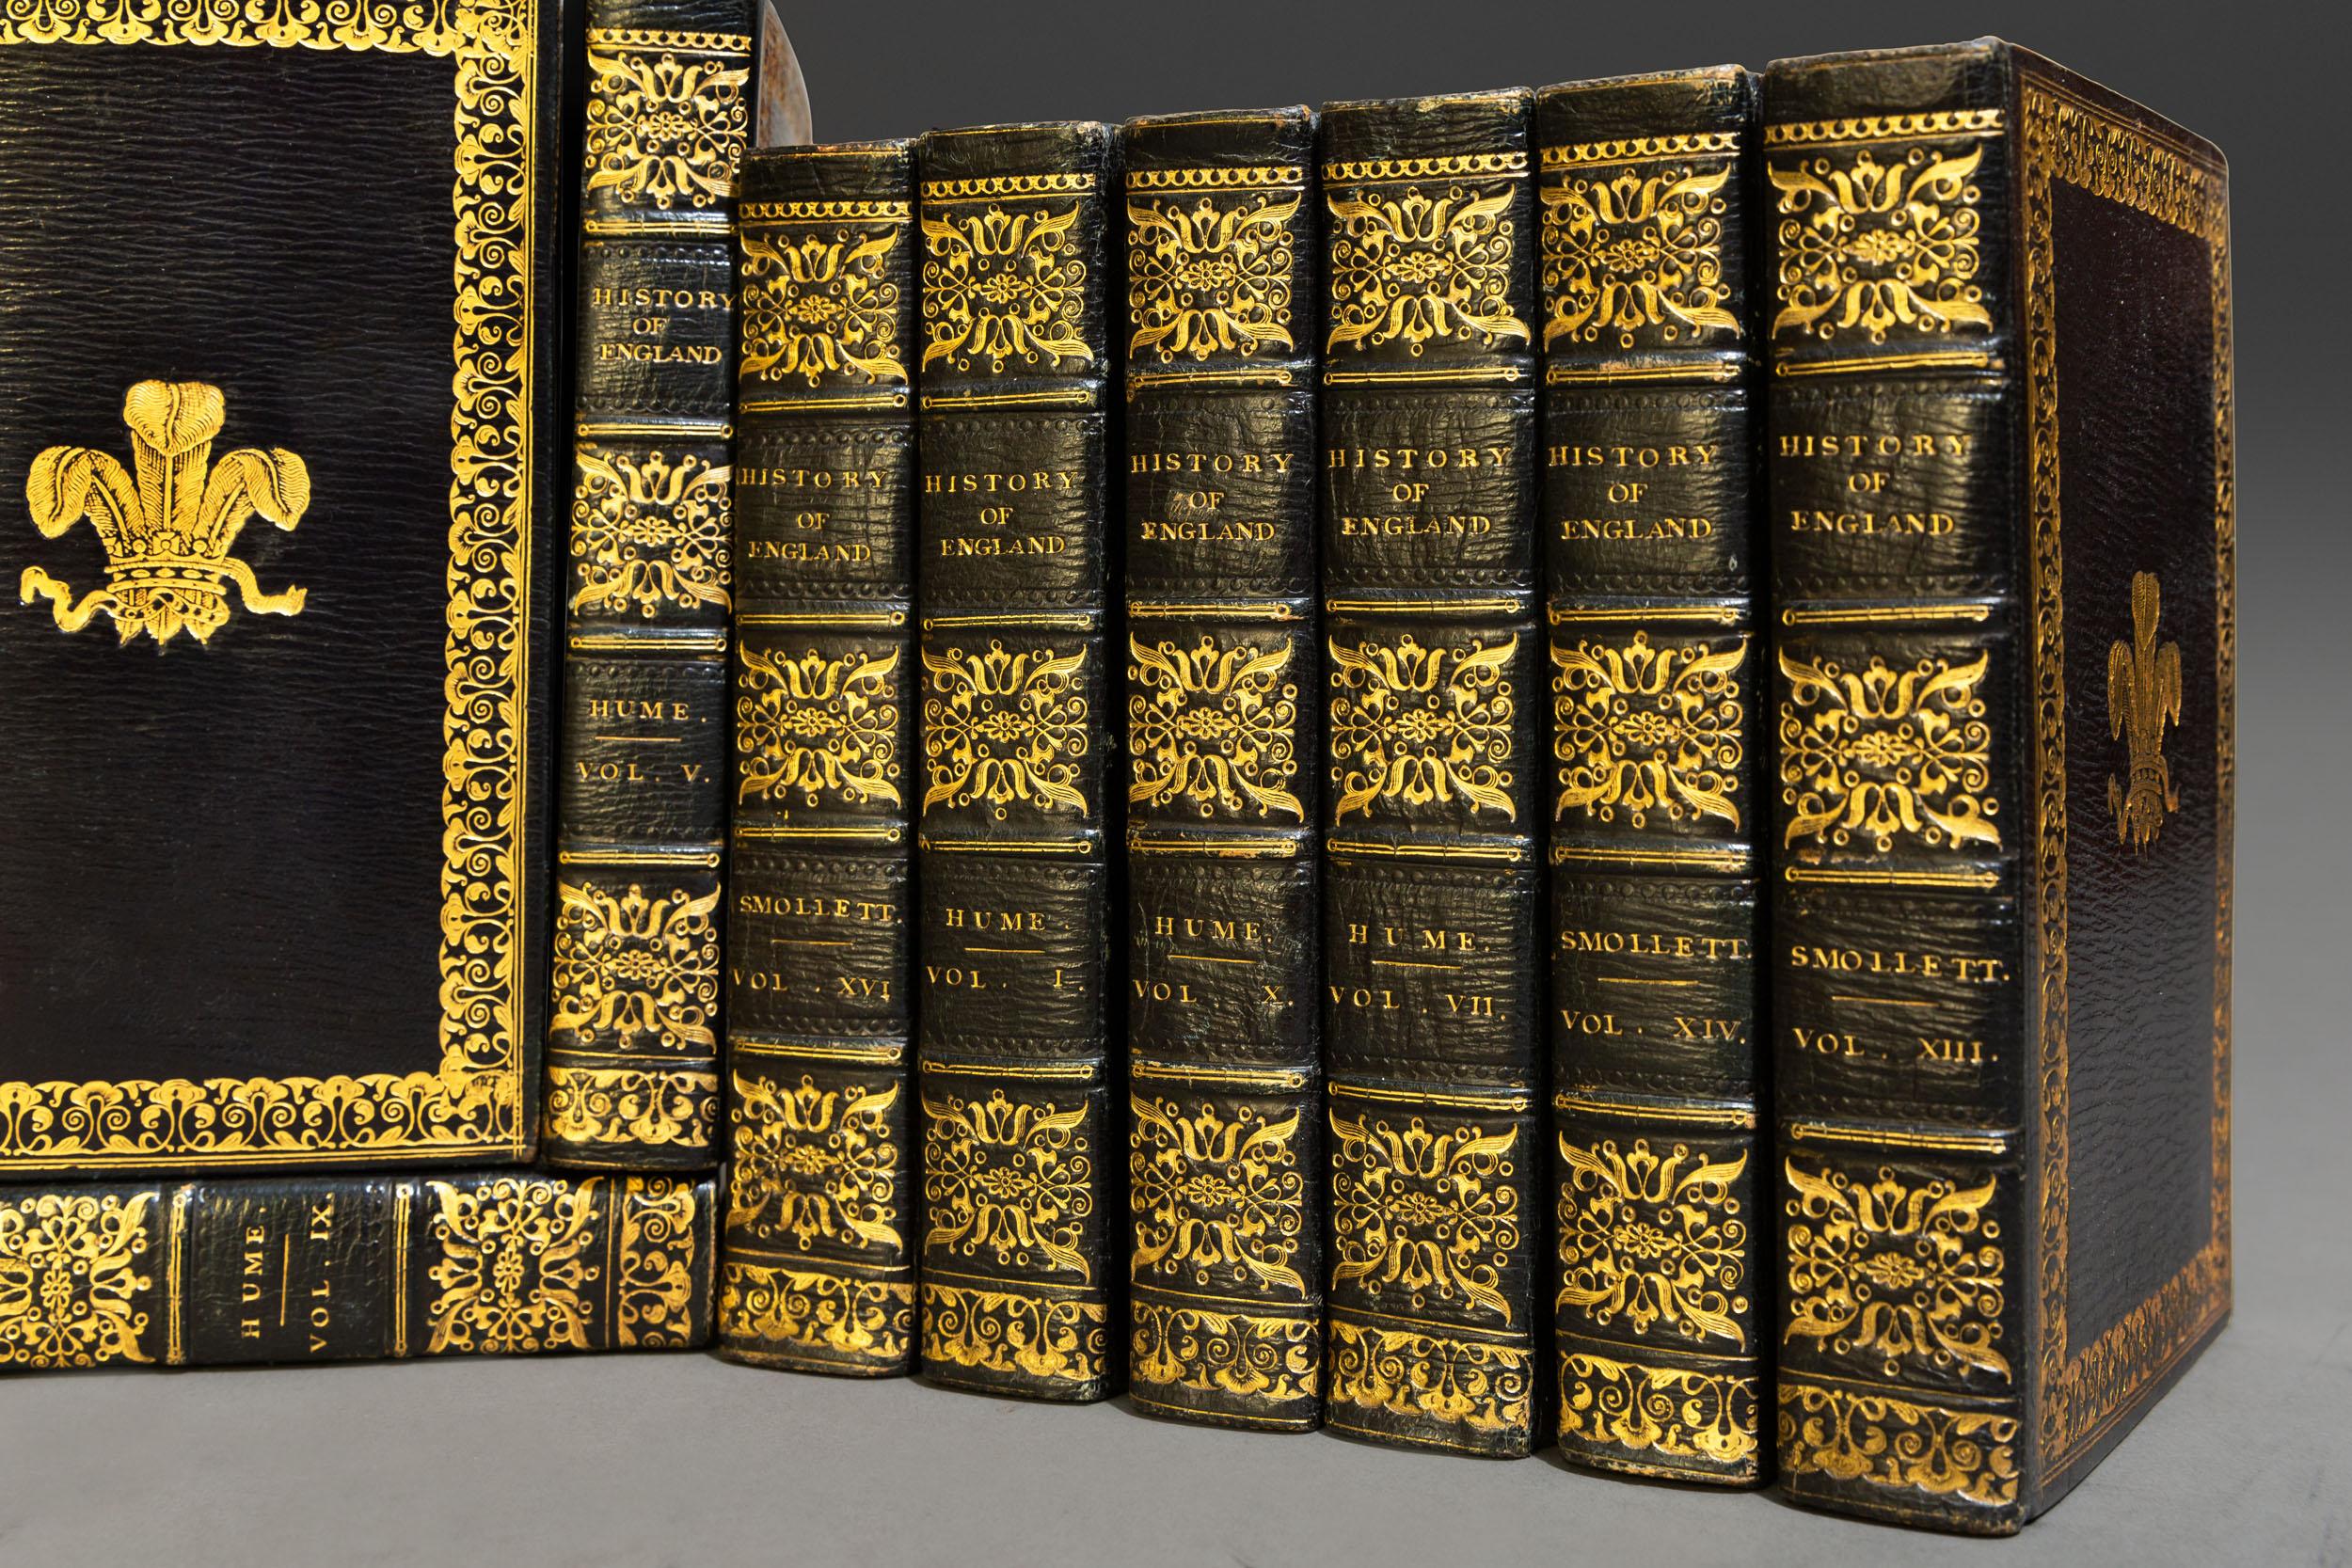 (Book Sets) 16 Volumes. David Hume & Tobias Smollett. The History Of England. Bound in full blue morocco,
all edges gilt, raised bands, ornate gilt on spines and covers, crest on front and back covers. Published:
London: Christie & Son. 1819. A